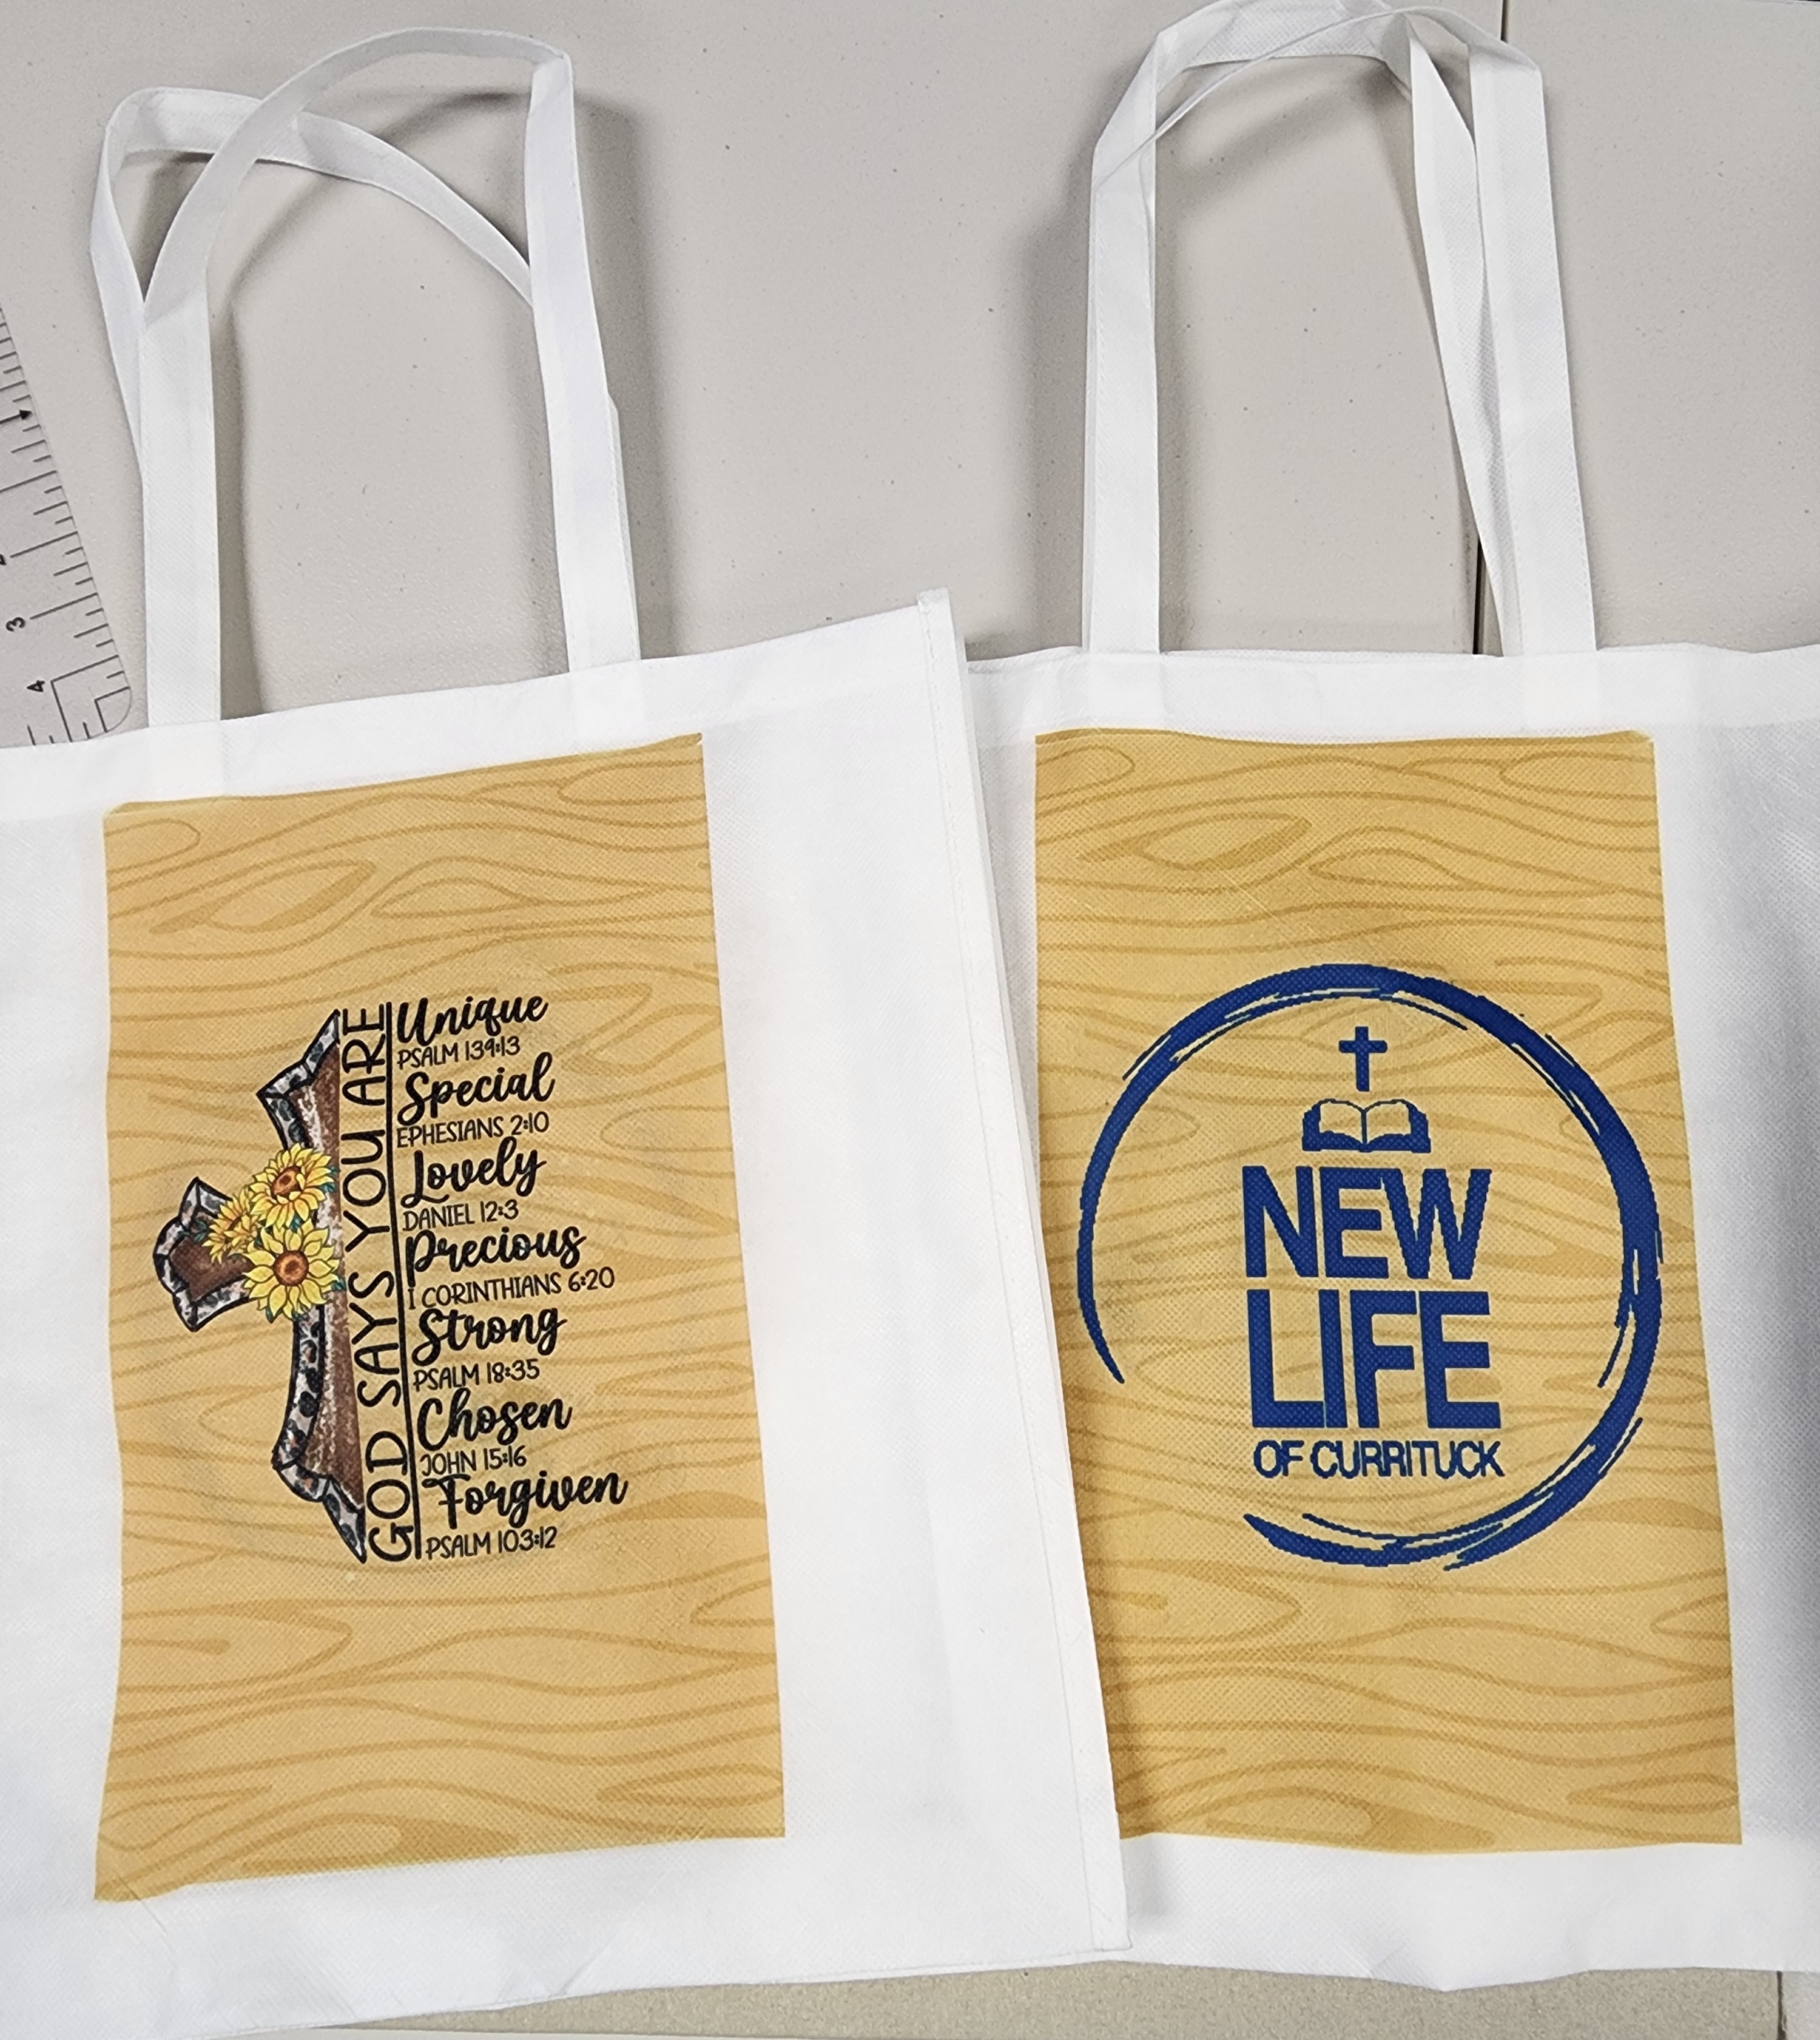 Reusable bags made with sublimation printing